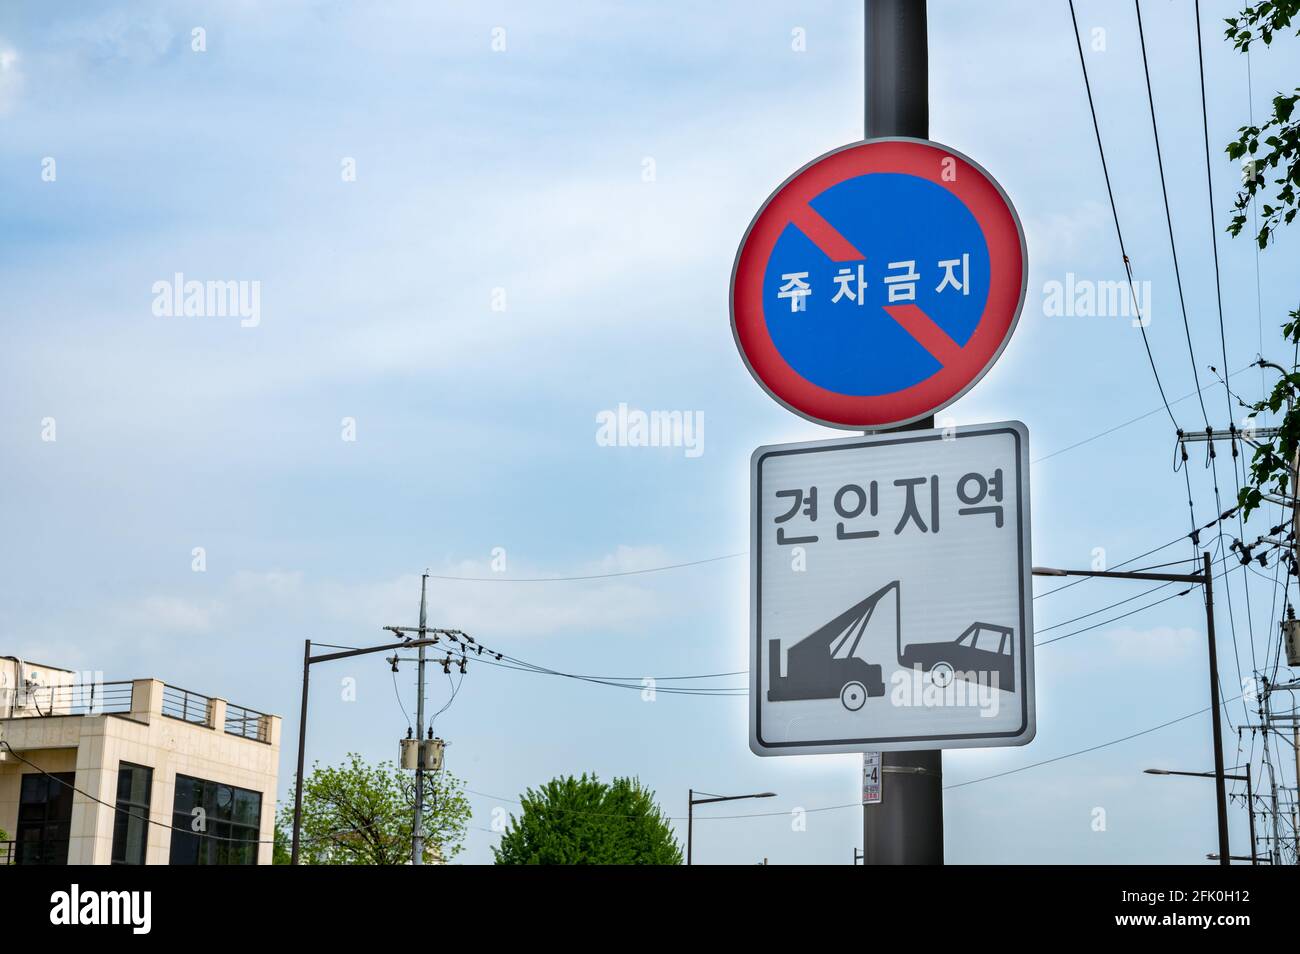 Traffic signs indicating no parking and towing areas in Korean Stock Photo